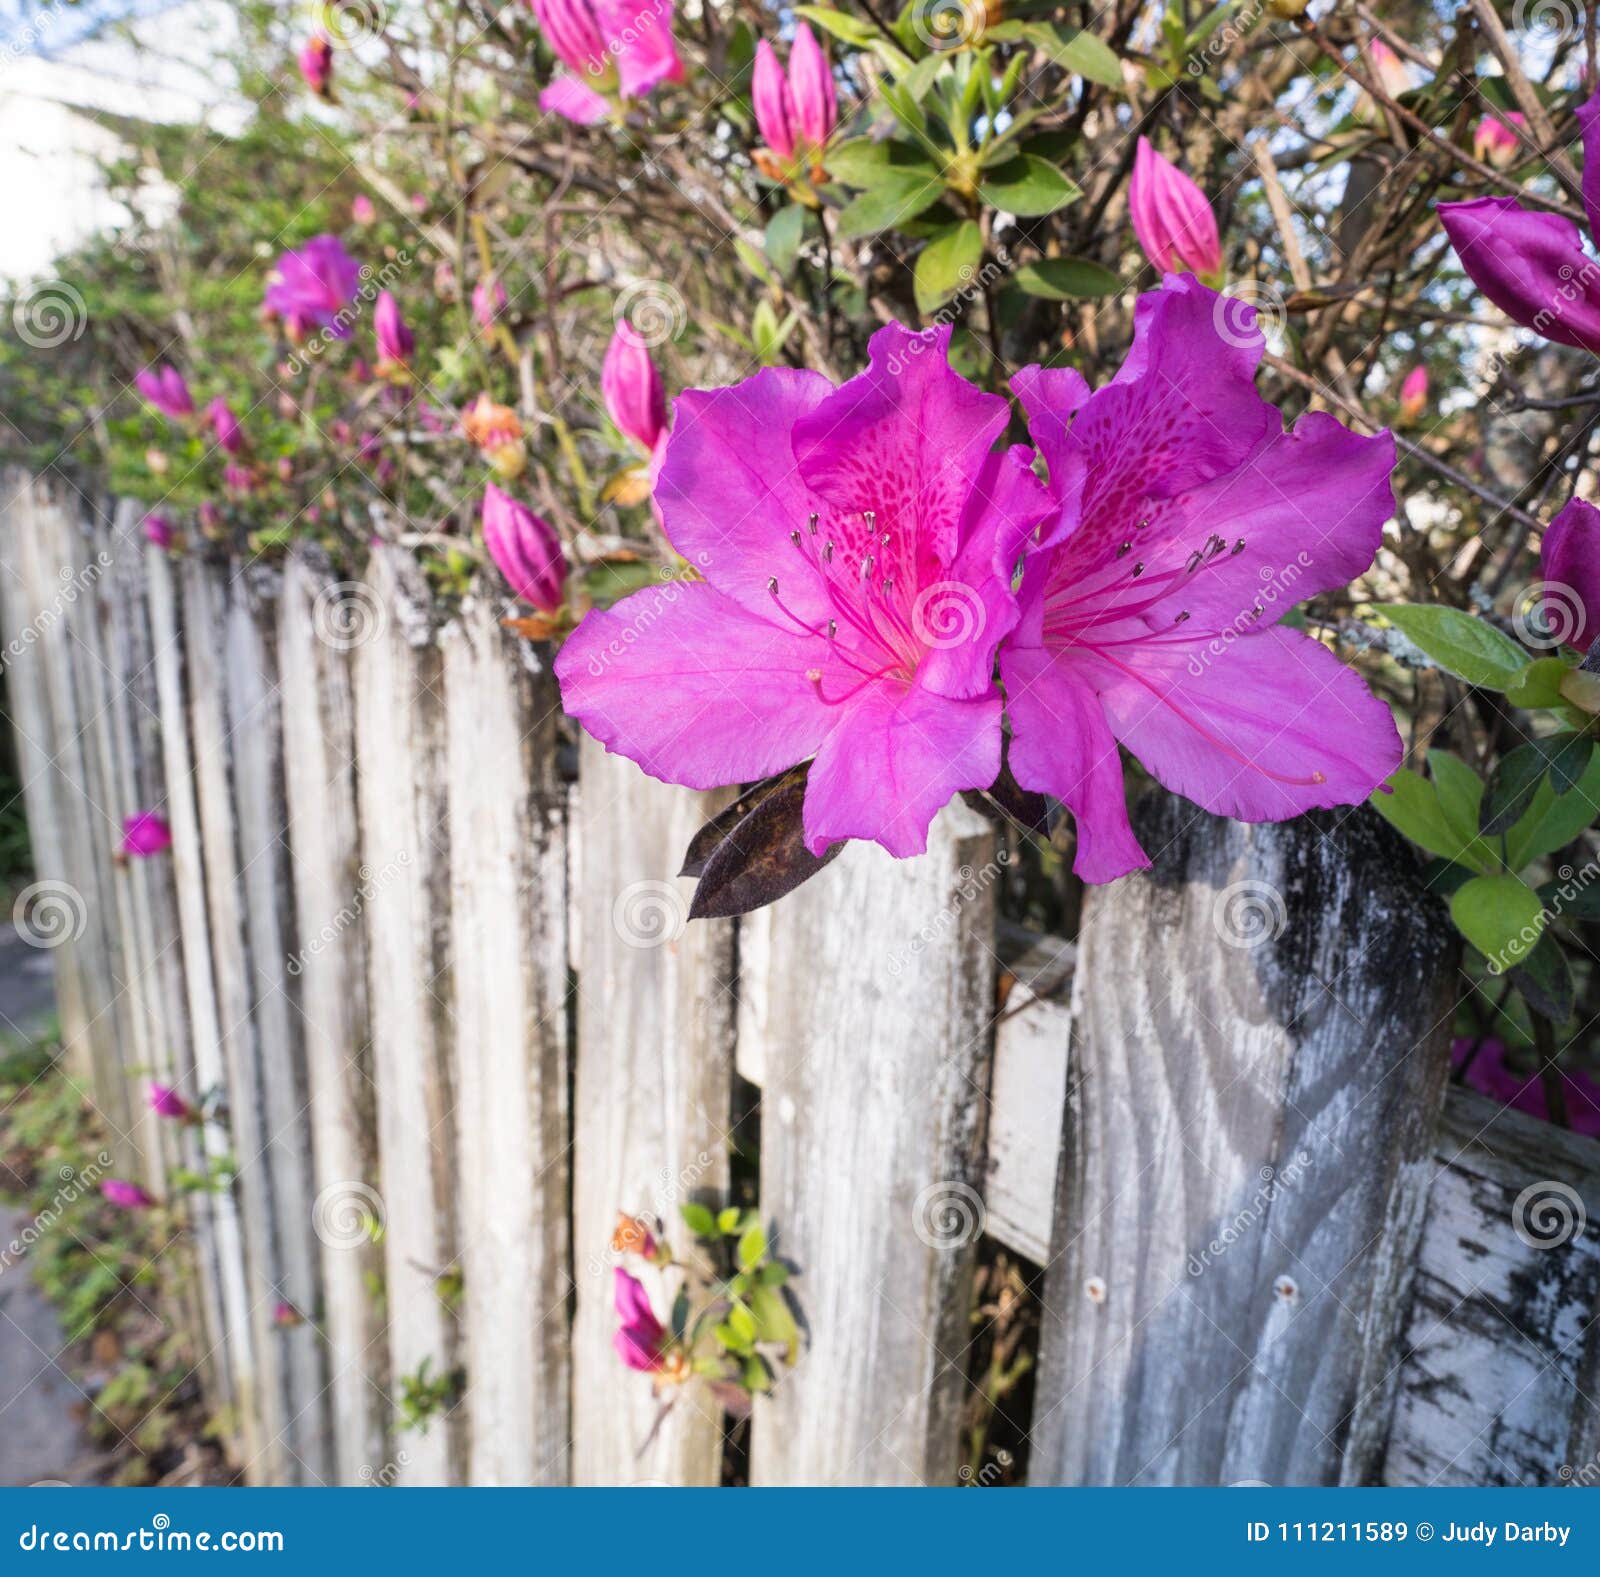 hot pink azelea blossoms growing on an old painted fence